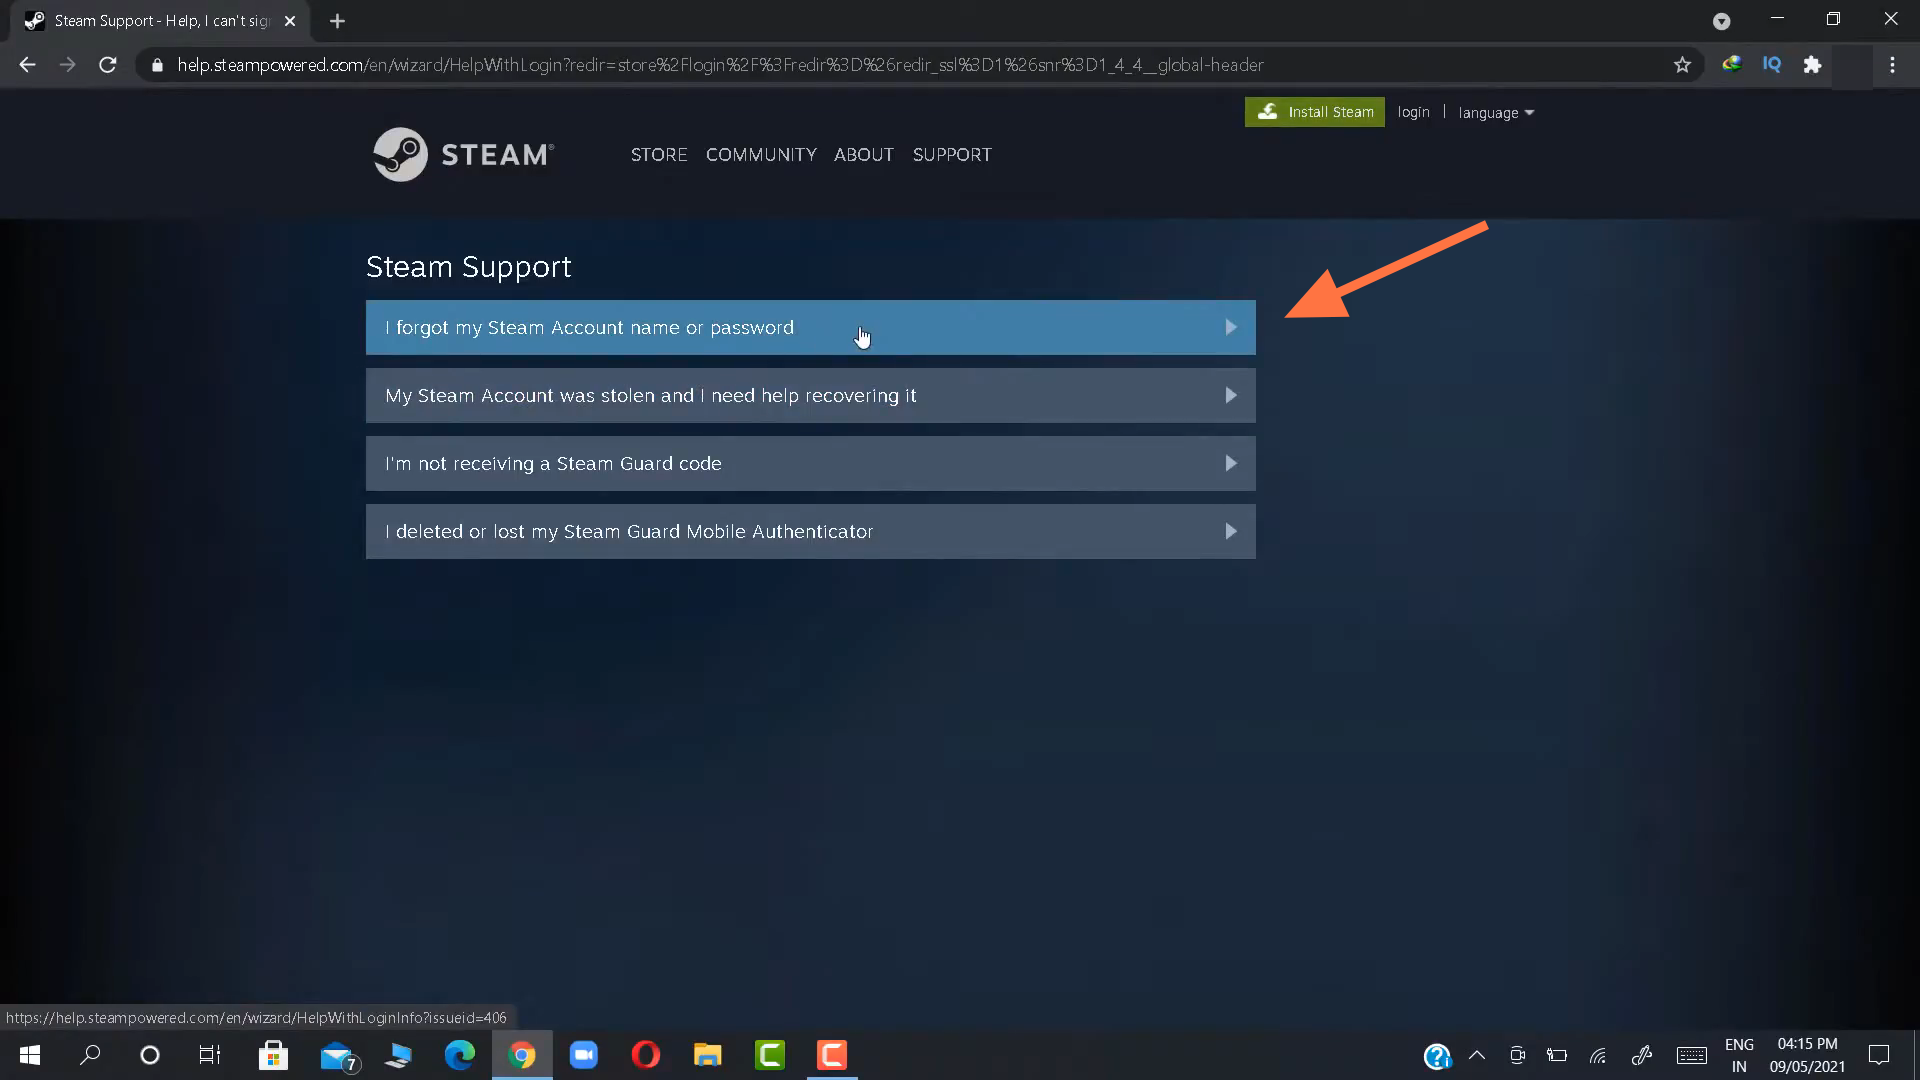  After that there will be few options on the screen select the first one which says ''i forgot my steam account name or password''.